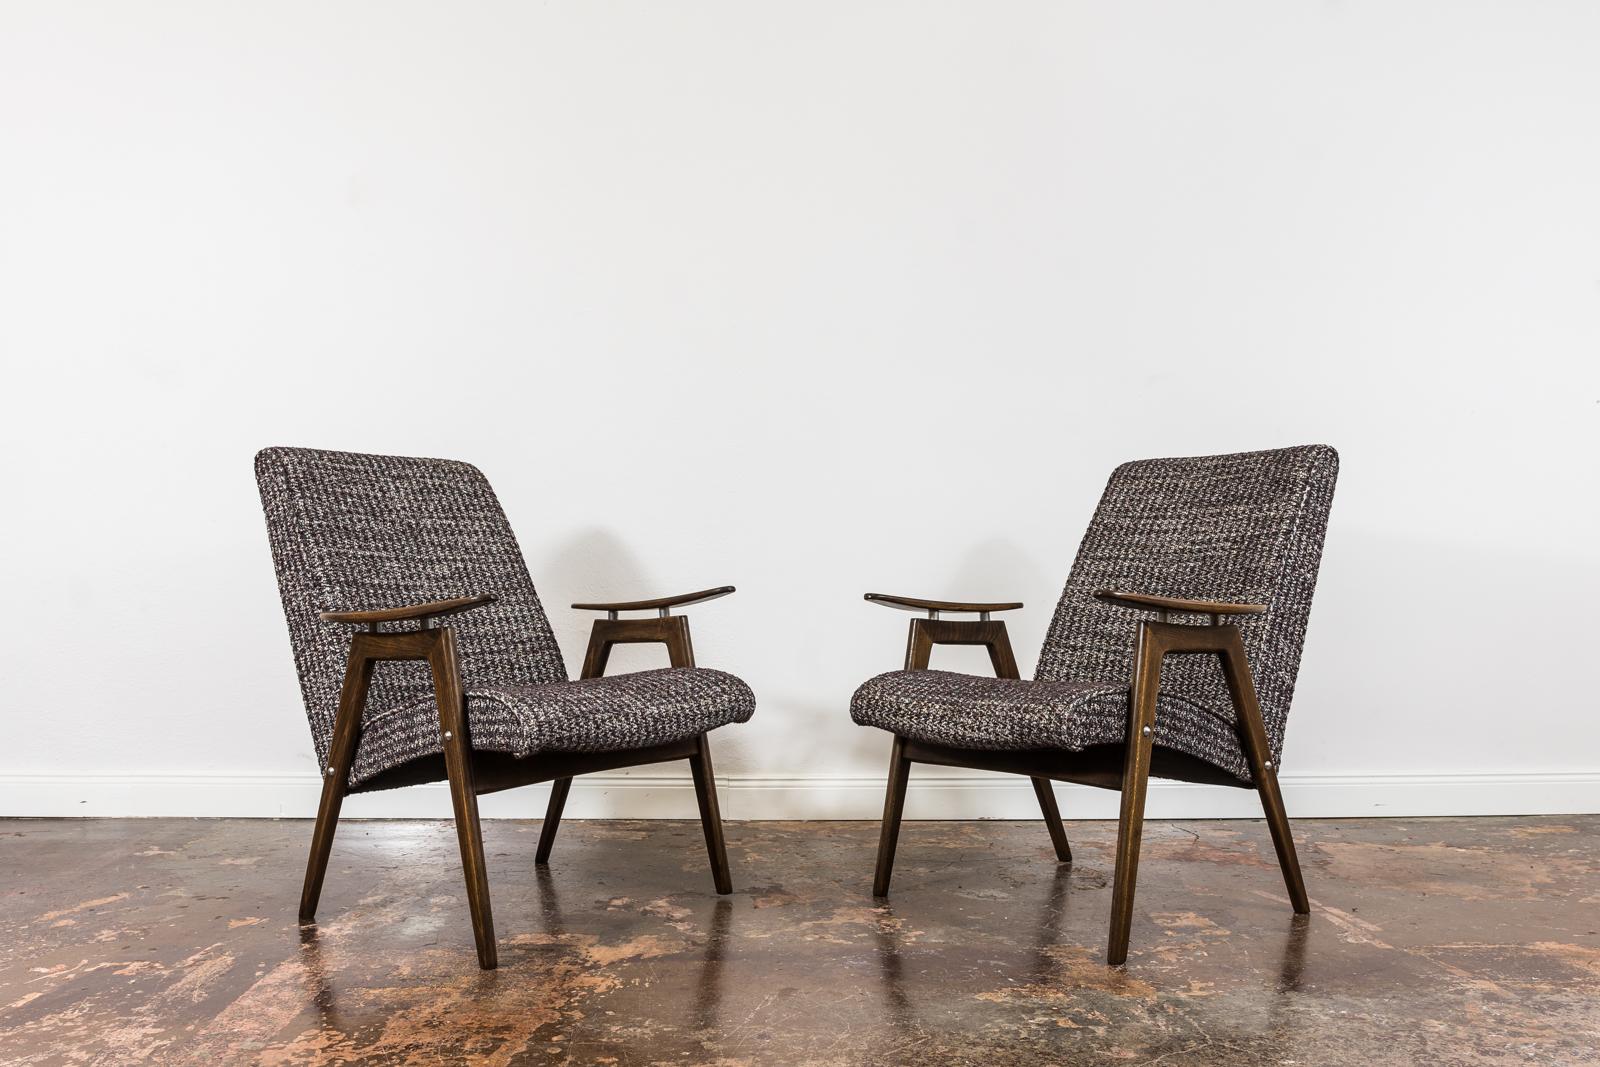 Pair of armchairs designed by Jaroslav Šmídek for Jitona, Czechoslovakia, 1960's.
Reupholstered chairs in gray, brown, beige colours mix.
Wood frames have been completely restored and refinished